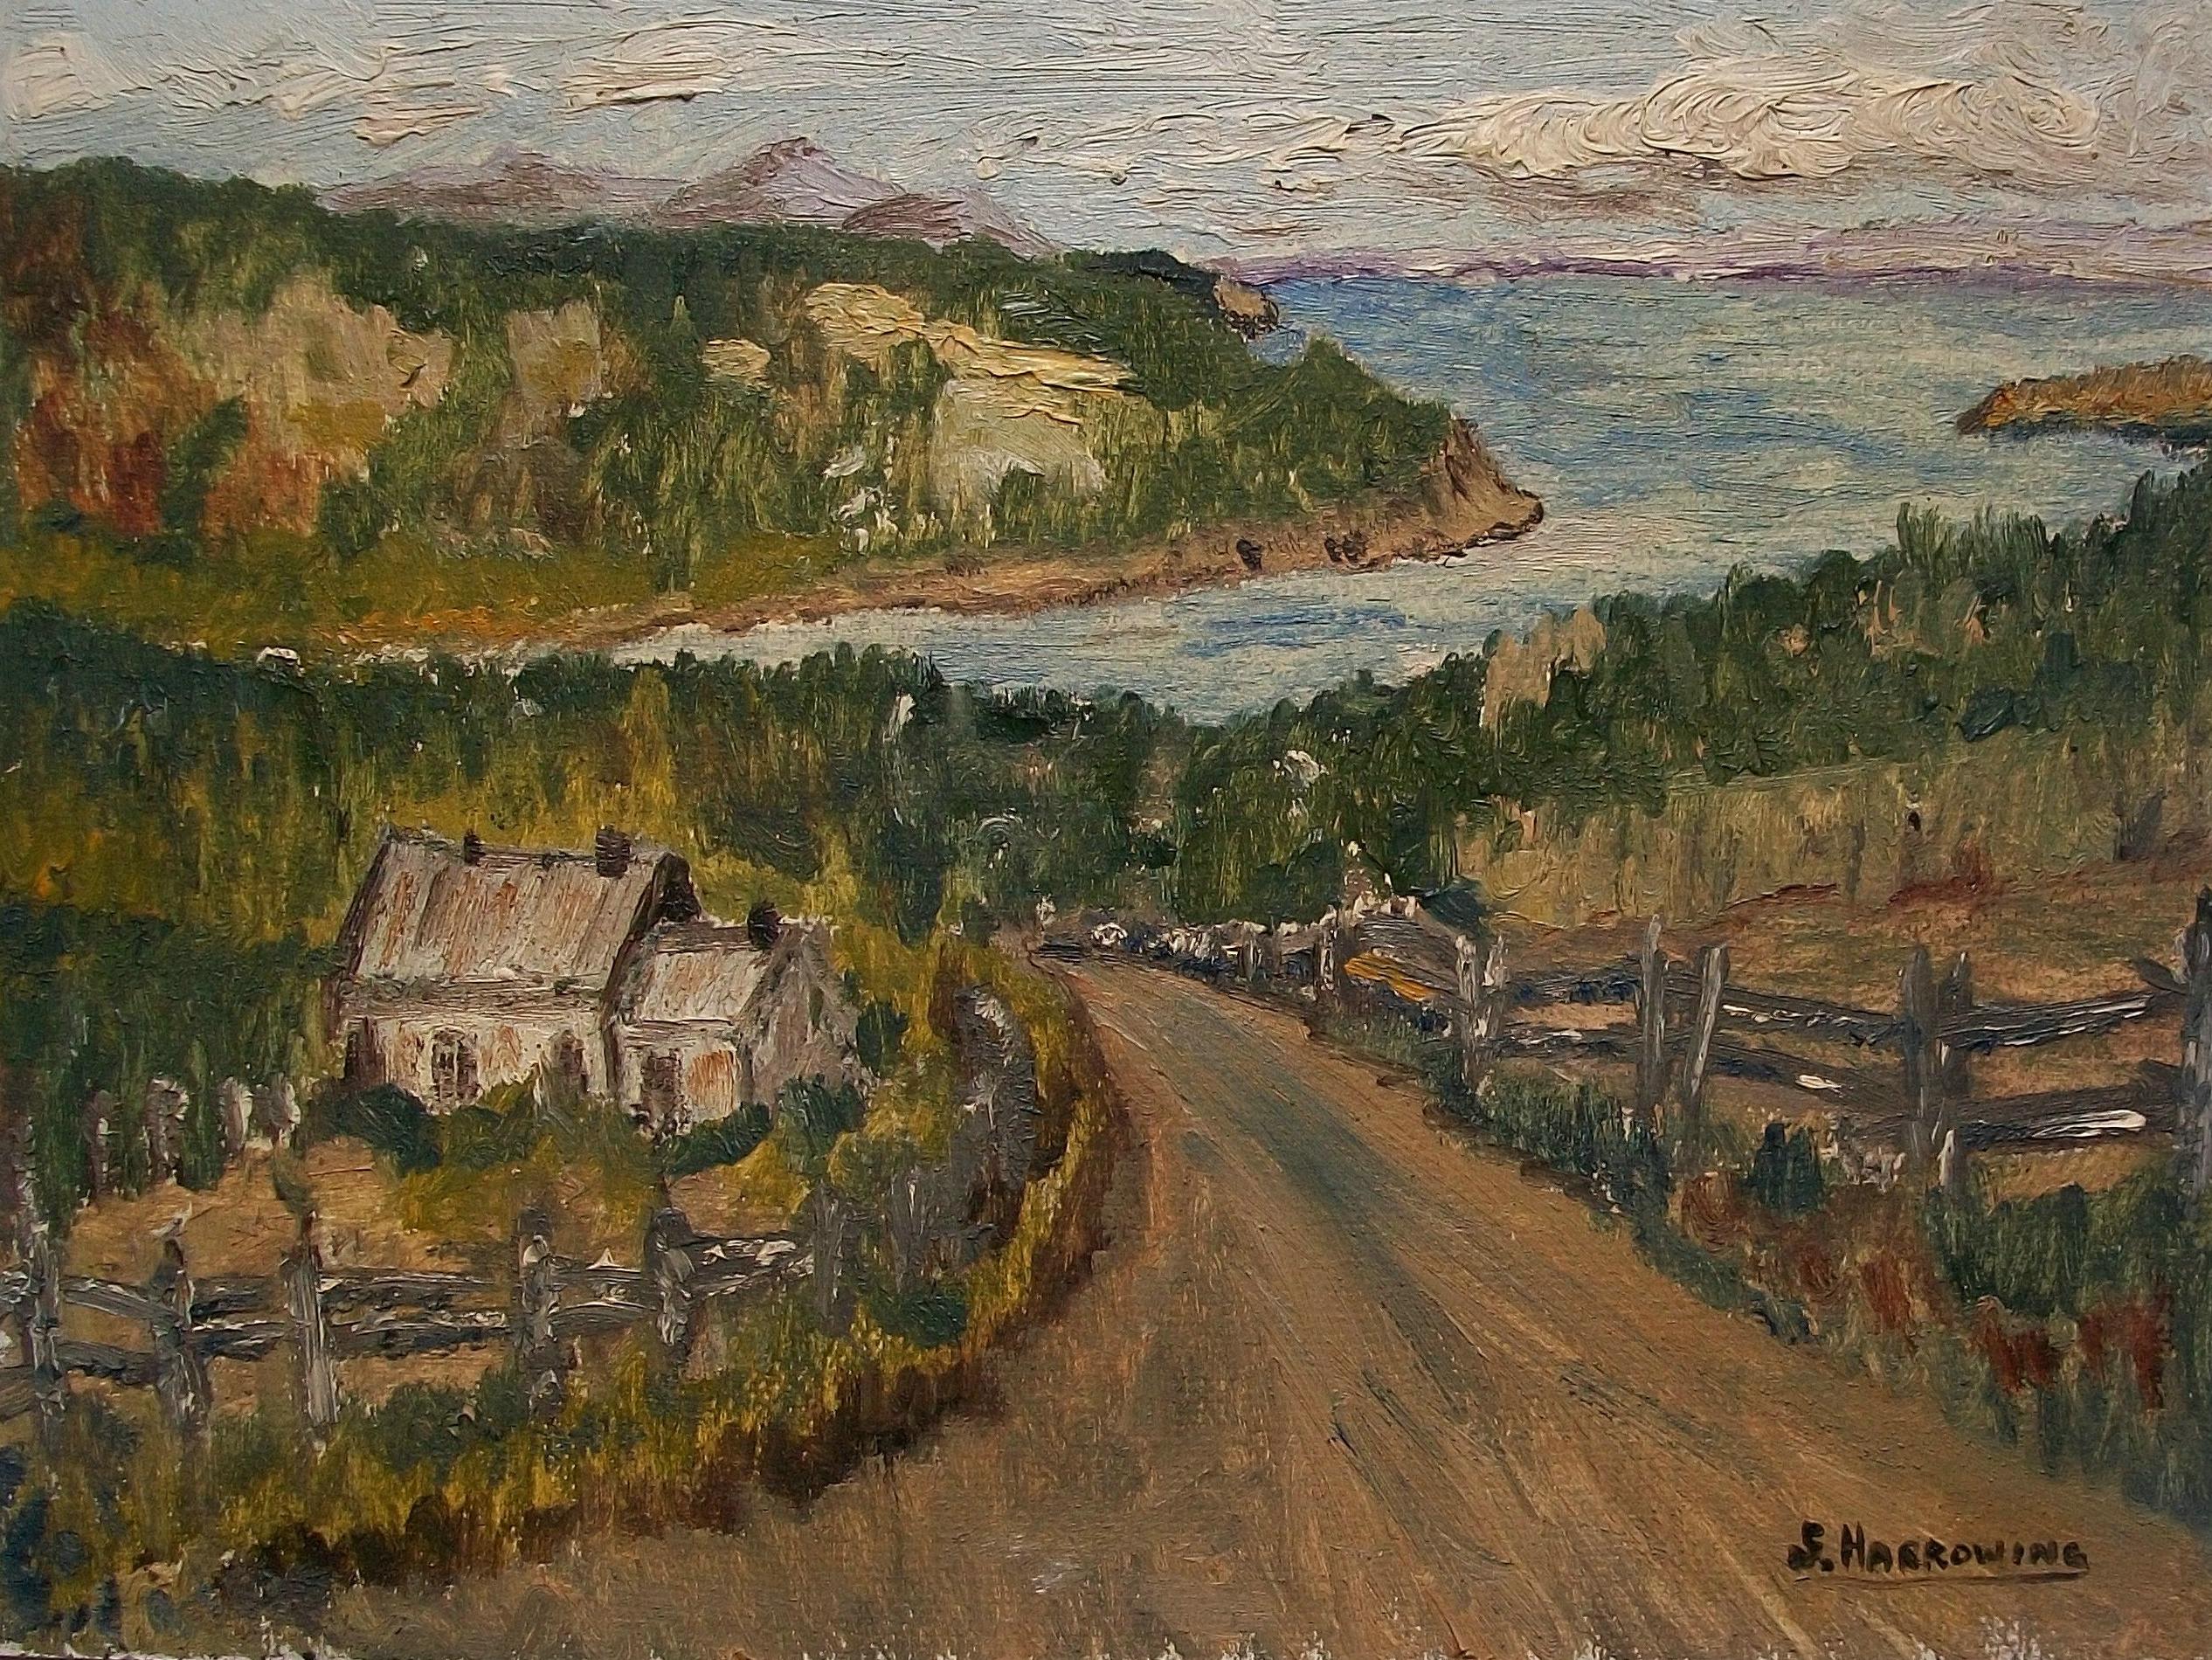 S. HARROWING - 'Baie St. Paul, Que.' - Fine Mid Century Canadian Impressionist landscape oil painting on Masonite panel - signed lower right - titled/dated on the exhibition label verso - unframed - Canada - June 1962. 

Excellent vintage condition